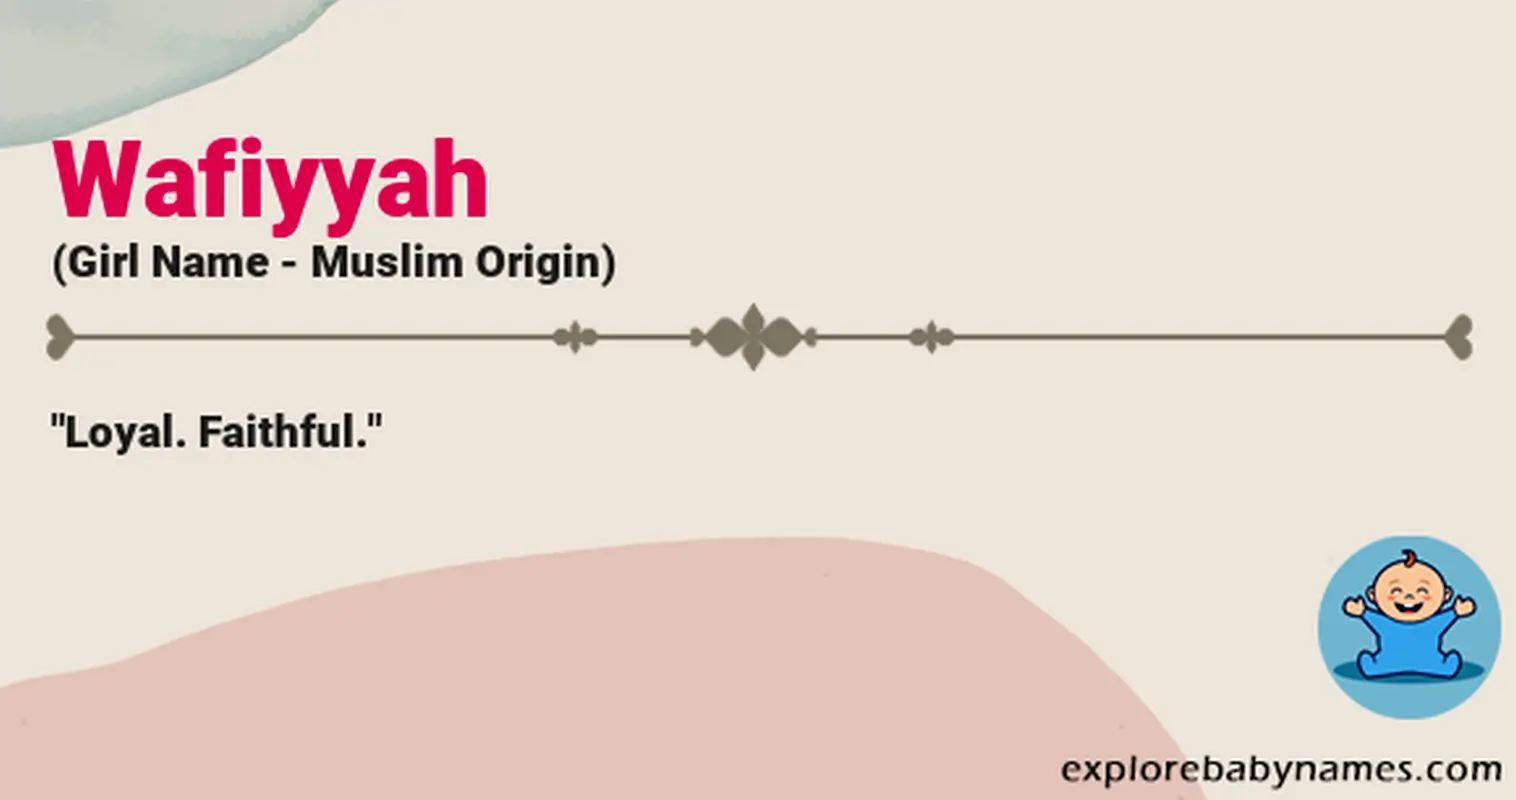 Meaning of Wafiyyah